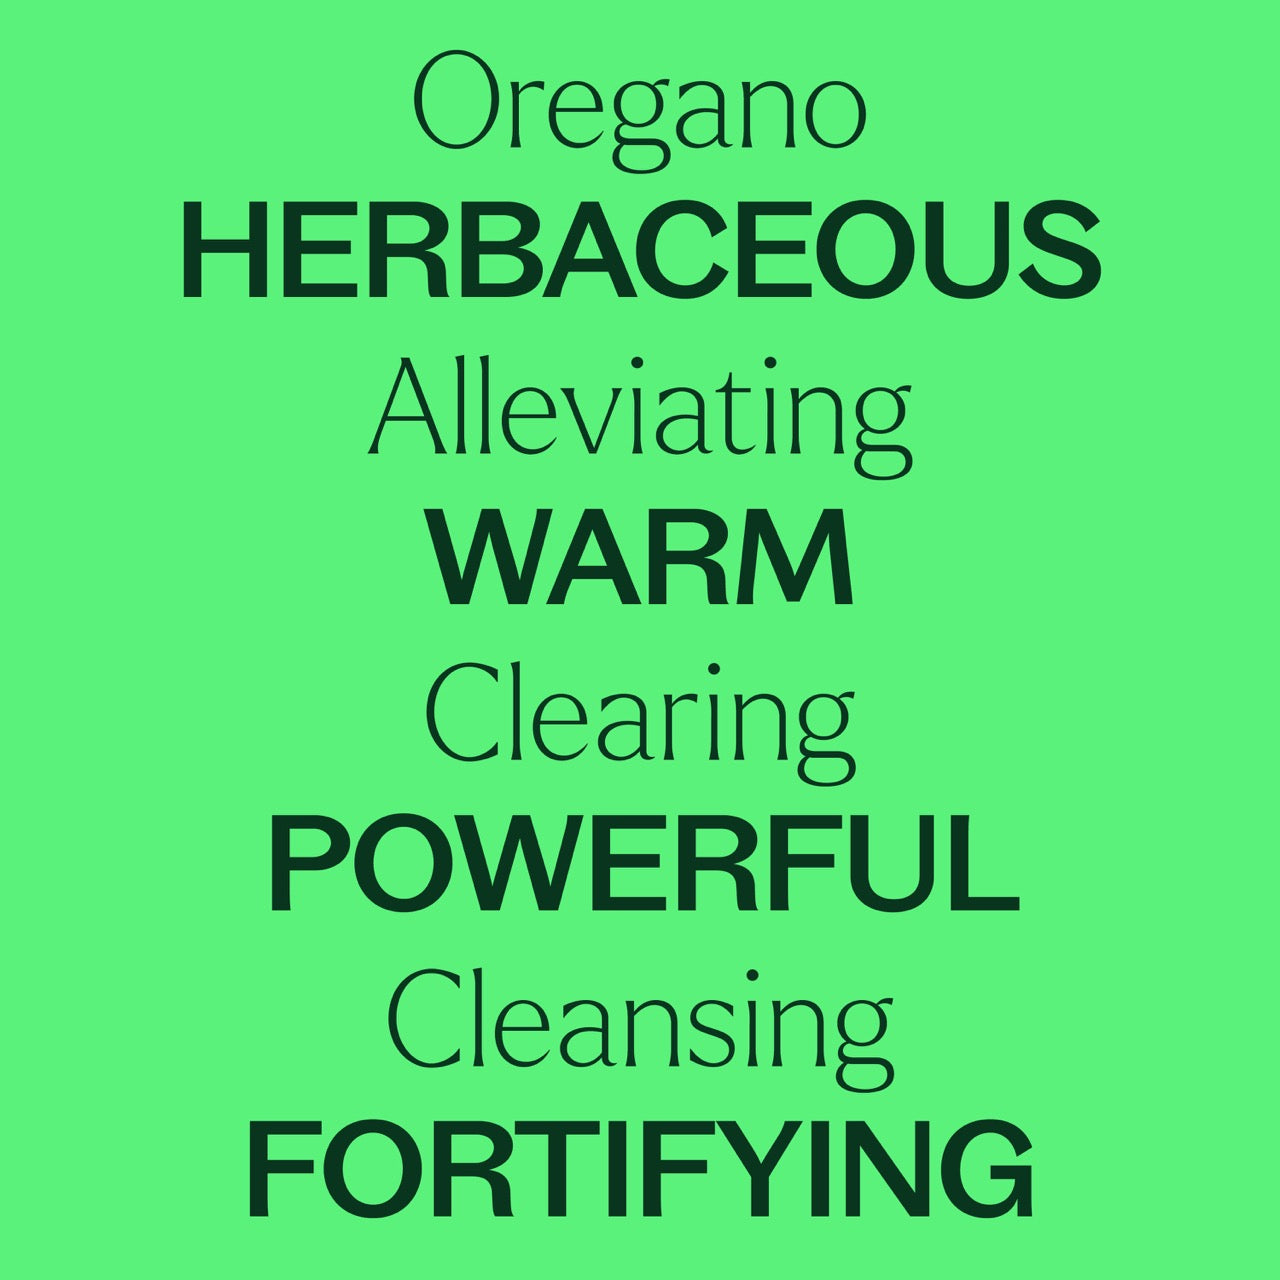 Oregano Essential Oil key features: herbaceous, alleviating, warm, clearing, powerful, cleansing, fortifying